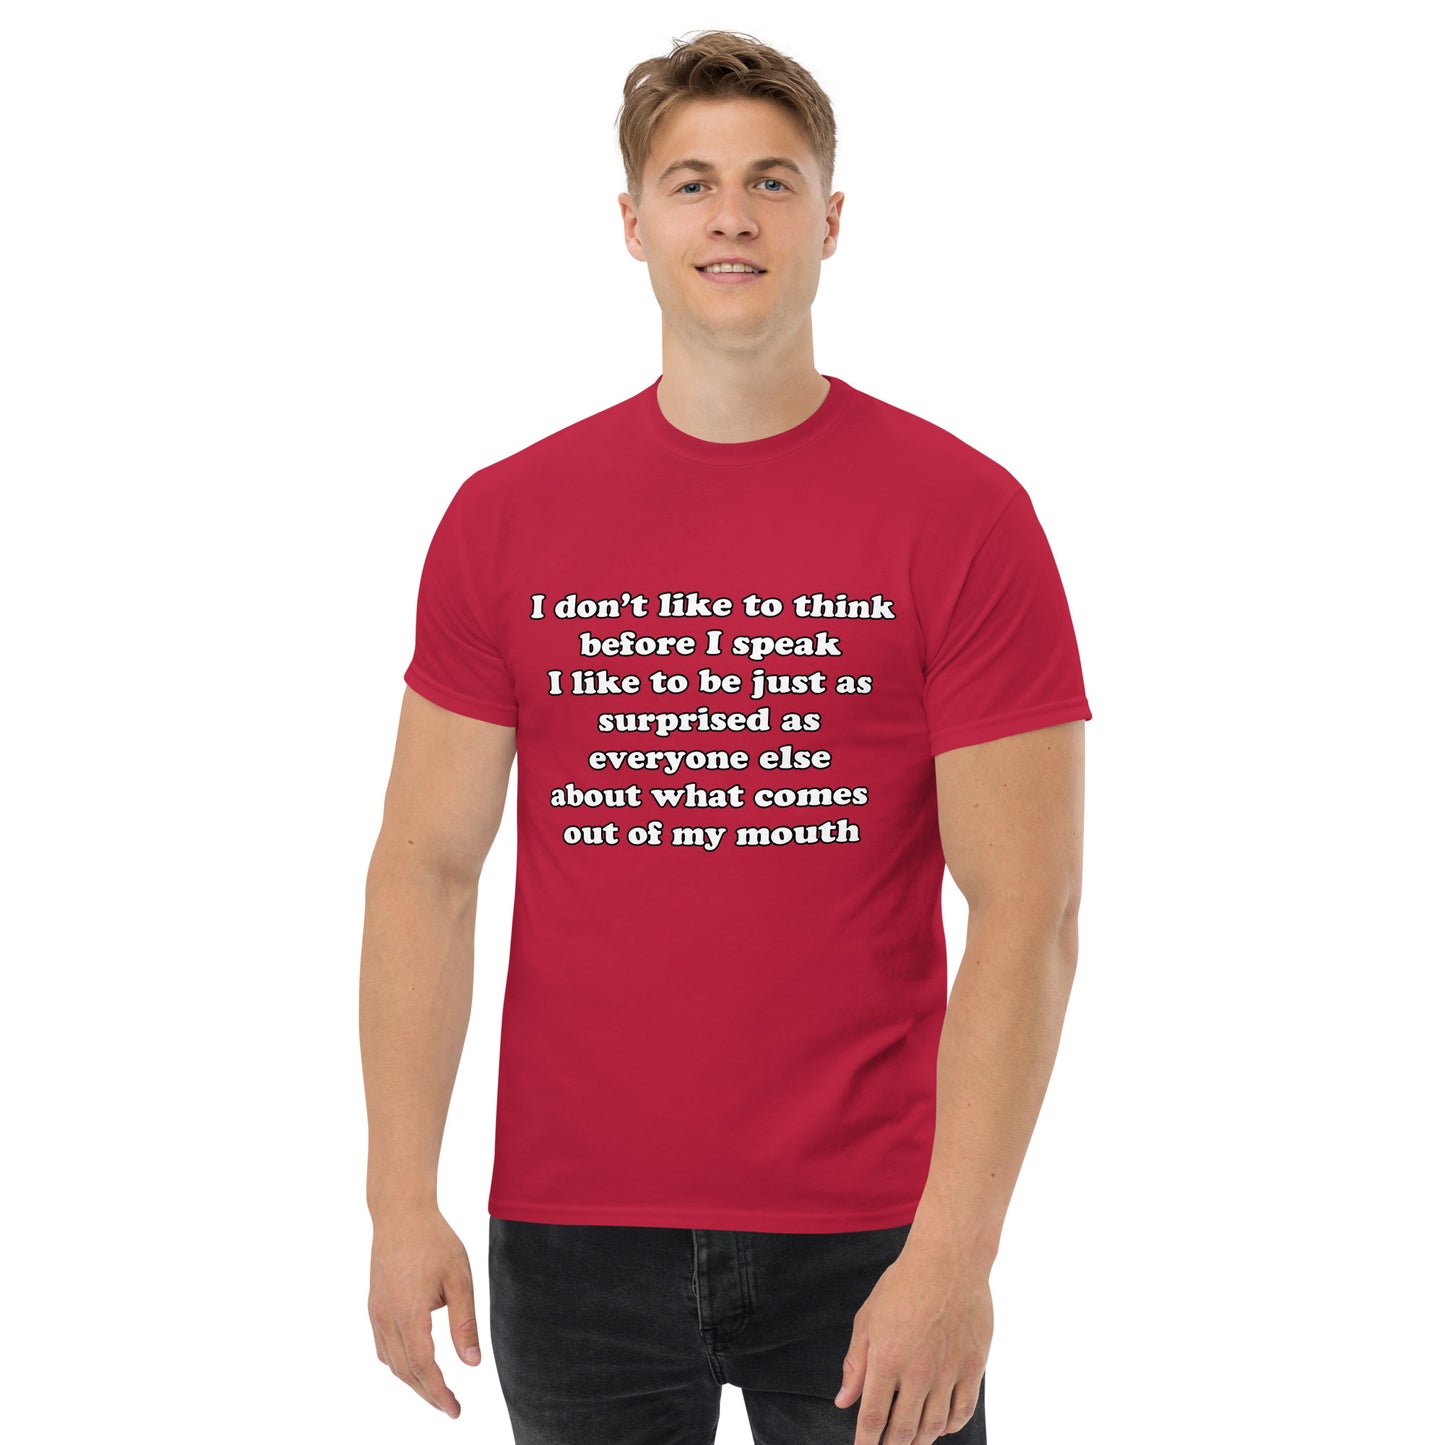 Man with cardinal red t-shirt with text “I don't think before I speak Just as serprised as everyone about what comes out of my mouth"